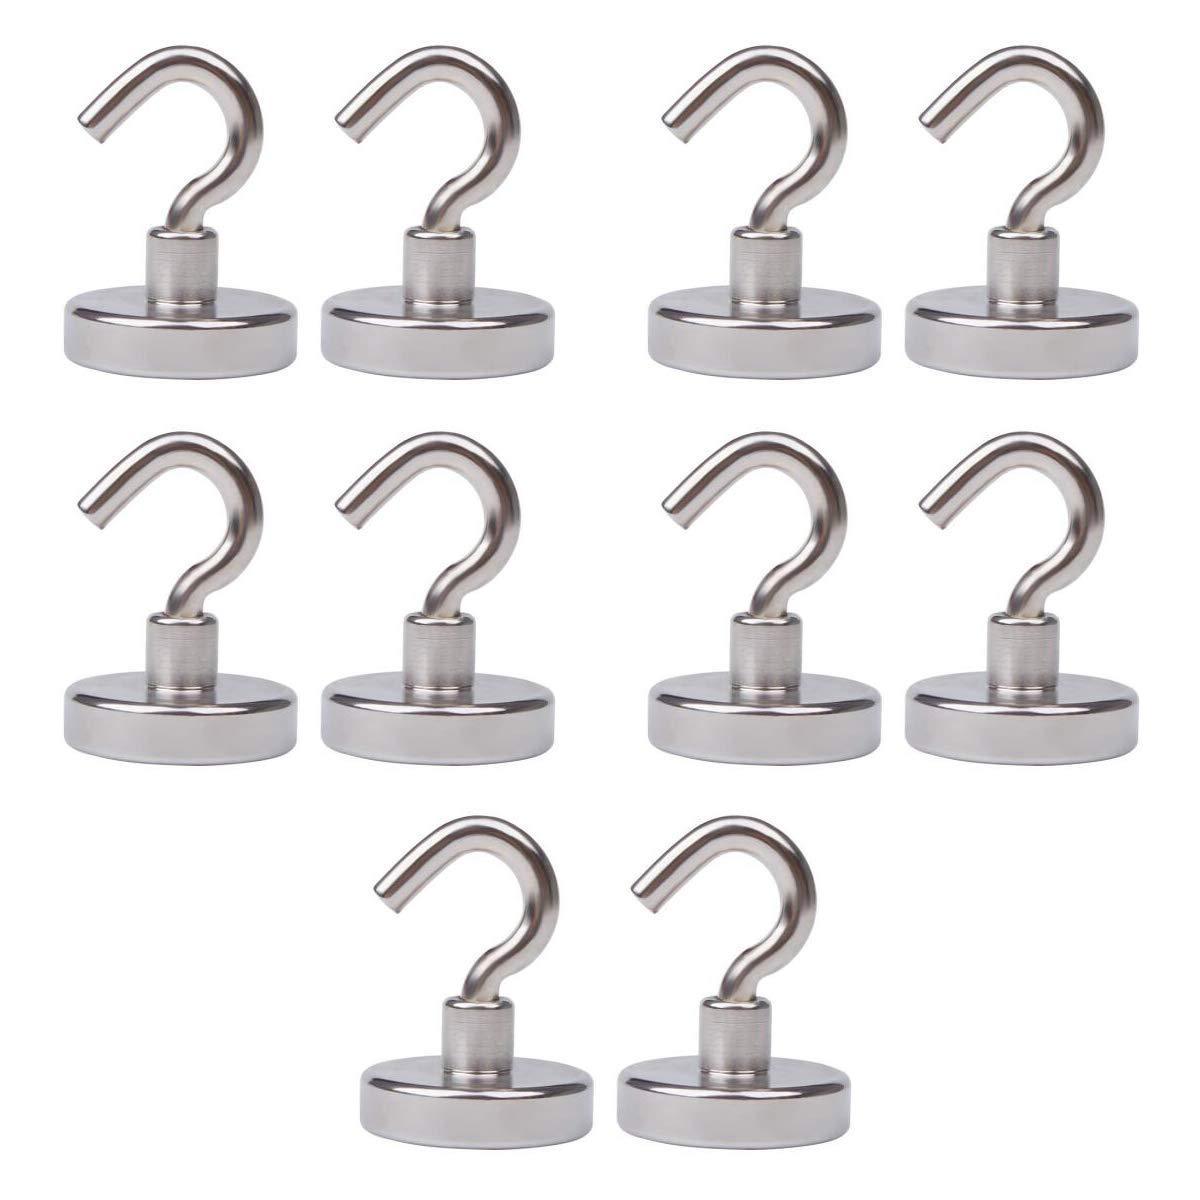 Buy tlbtek 10 pack of 75 lbs neodymium magnetic hooks heavy duty powerful strong magnetic hooks for bathroom bedroom kitchen workplace office and garage